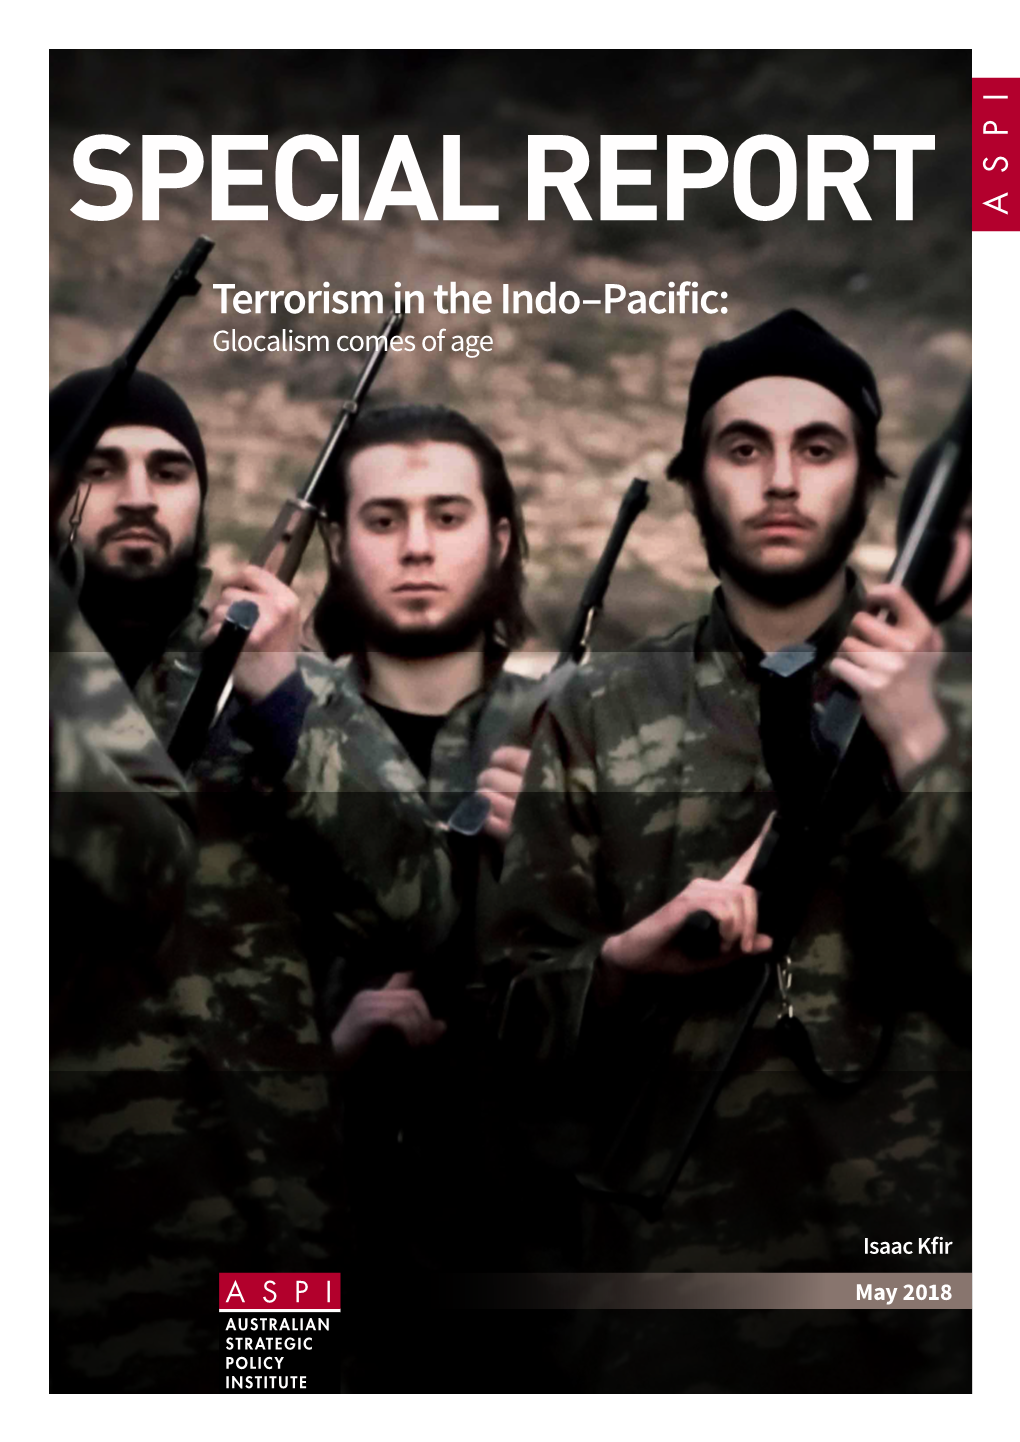 Terrorism in the Indo-Pacific Because Until Now Daesh’S Focus Has Been Mainly on the Fight in Syria and Iraq and AQ Has Been Engaged in a Program to Rebuilding